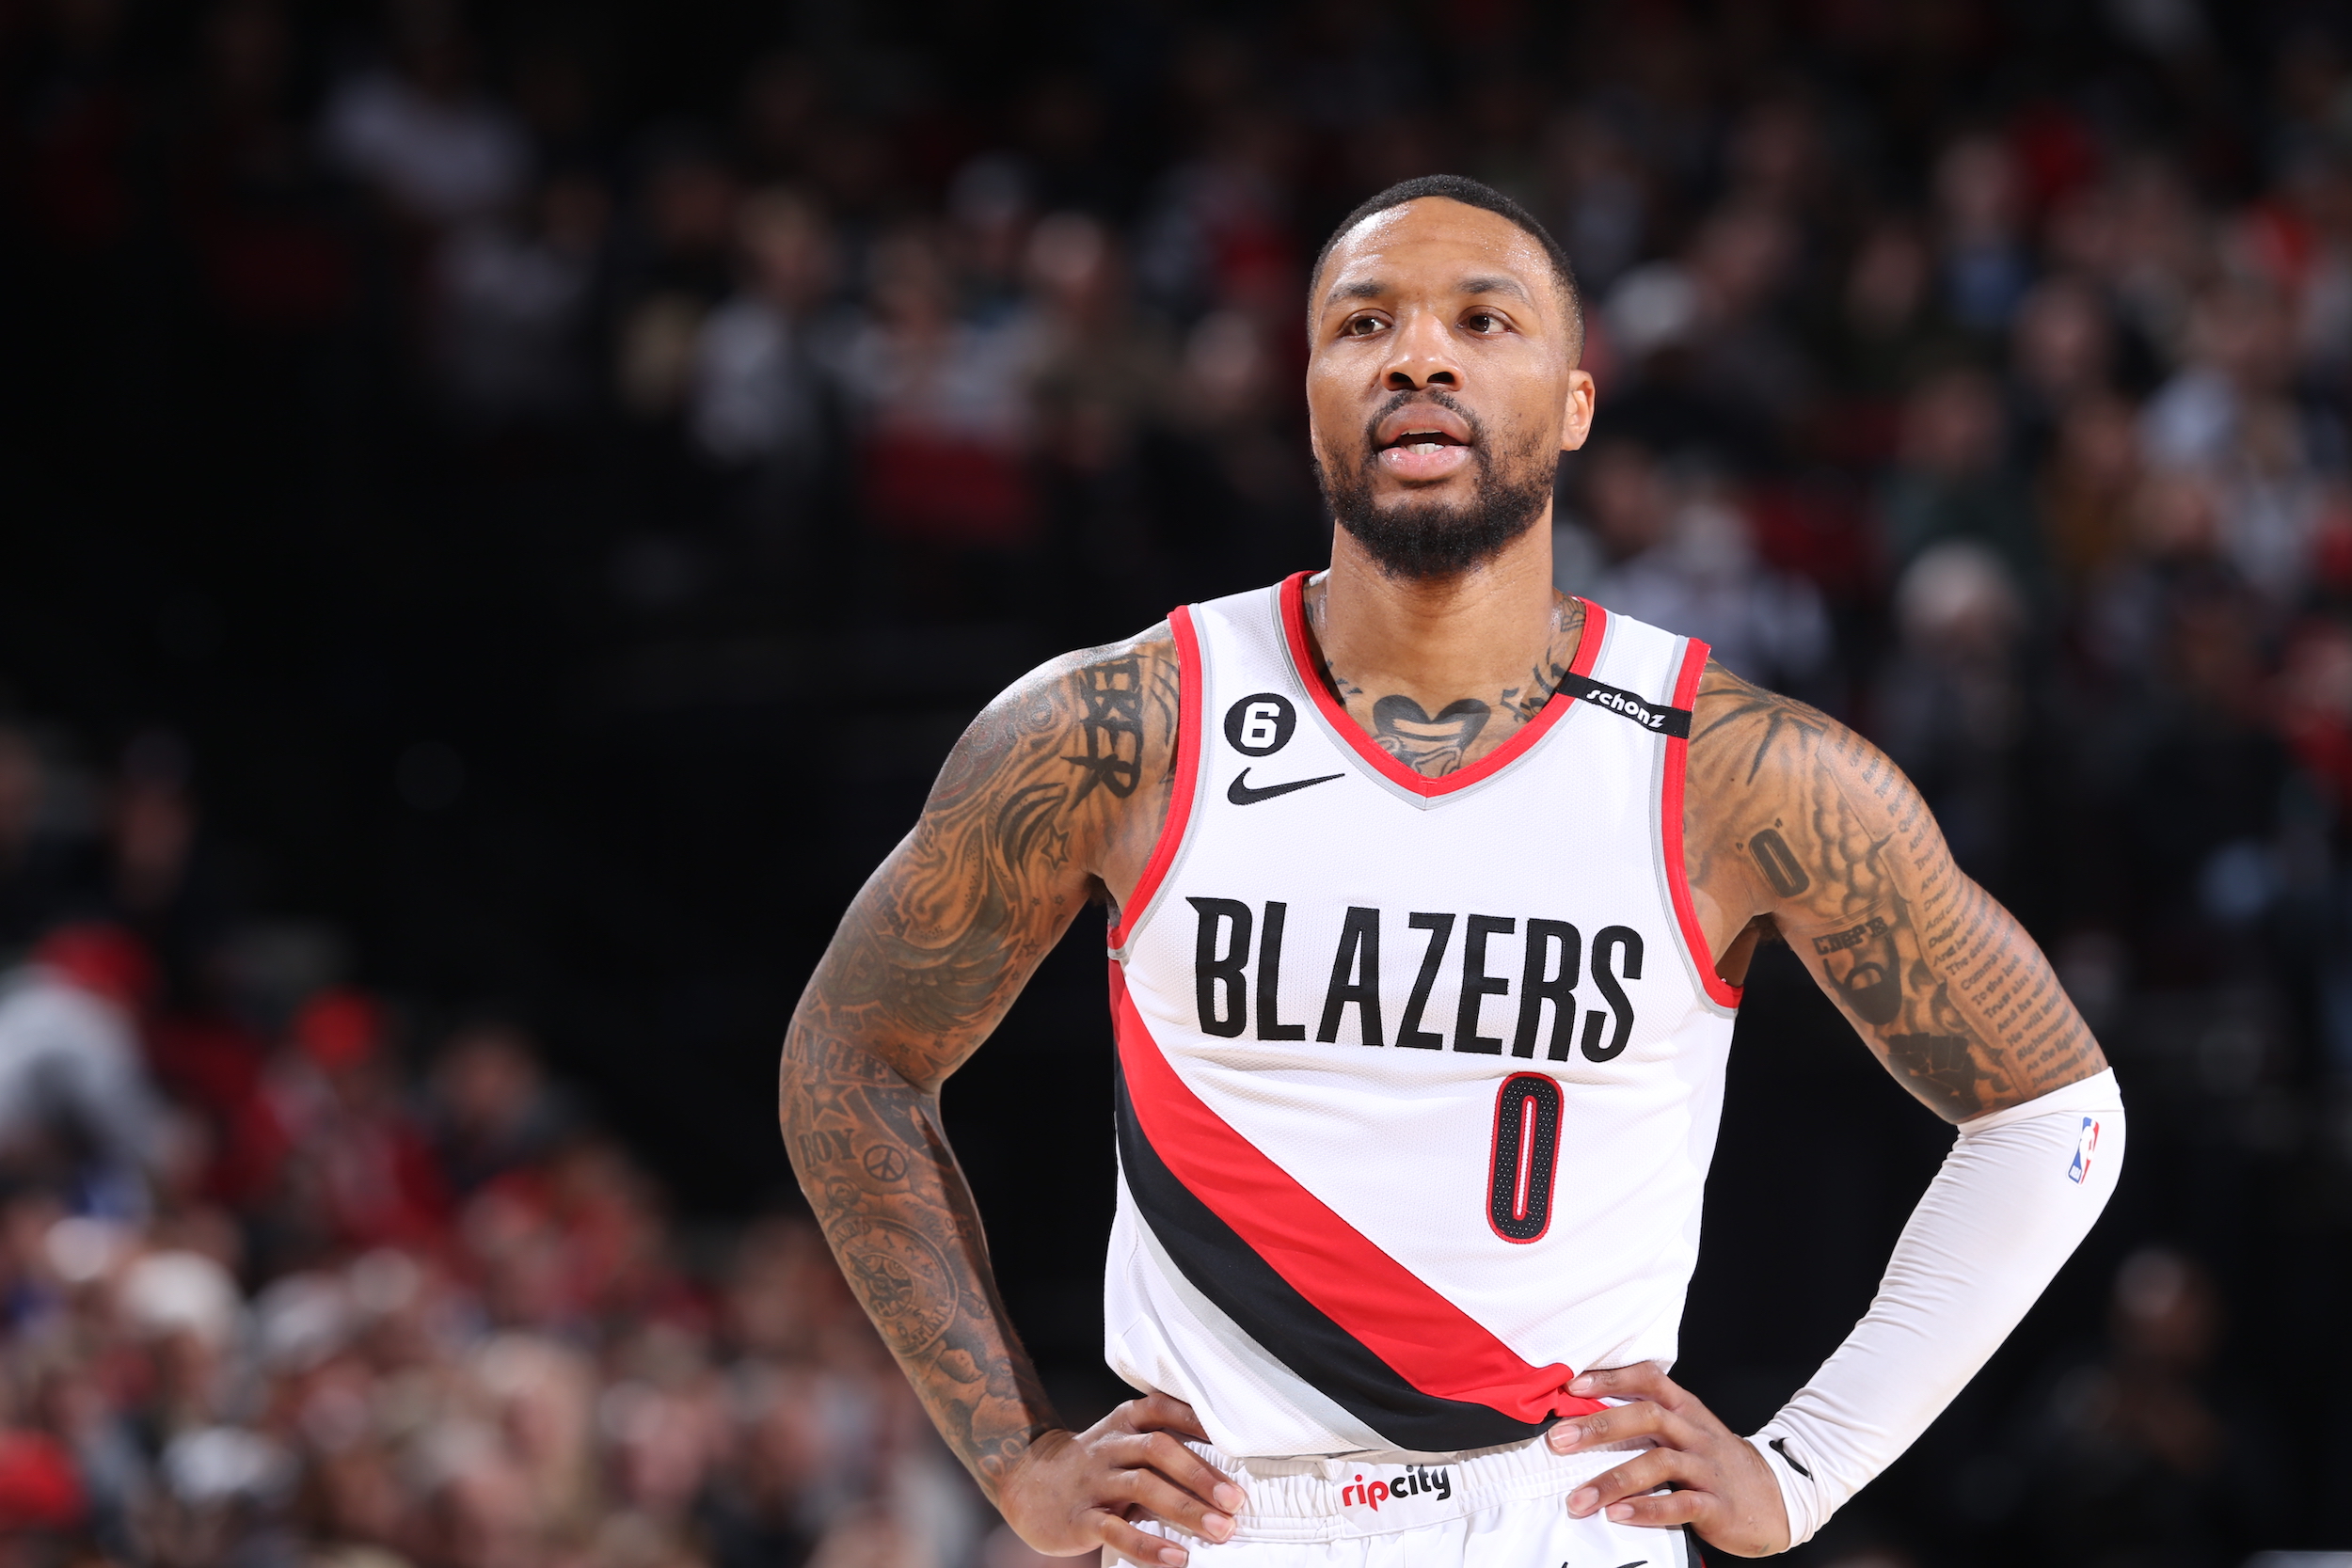 Damian Lillard of the Trail Blazers looks on during a game in Portland, Oregon.